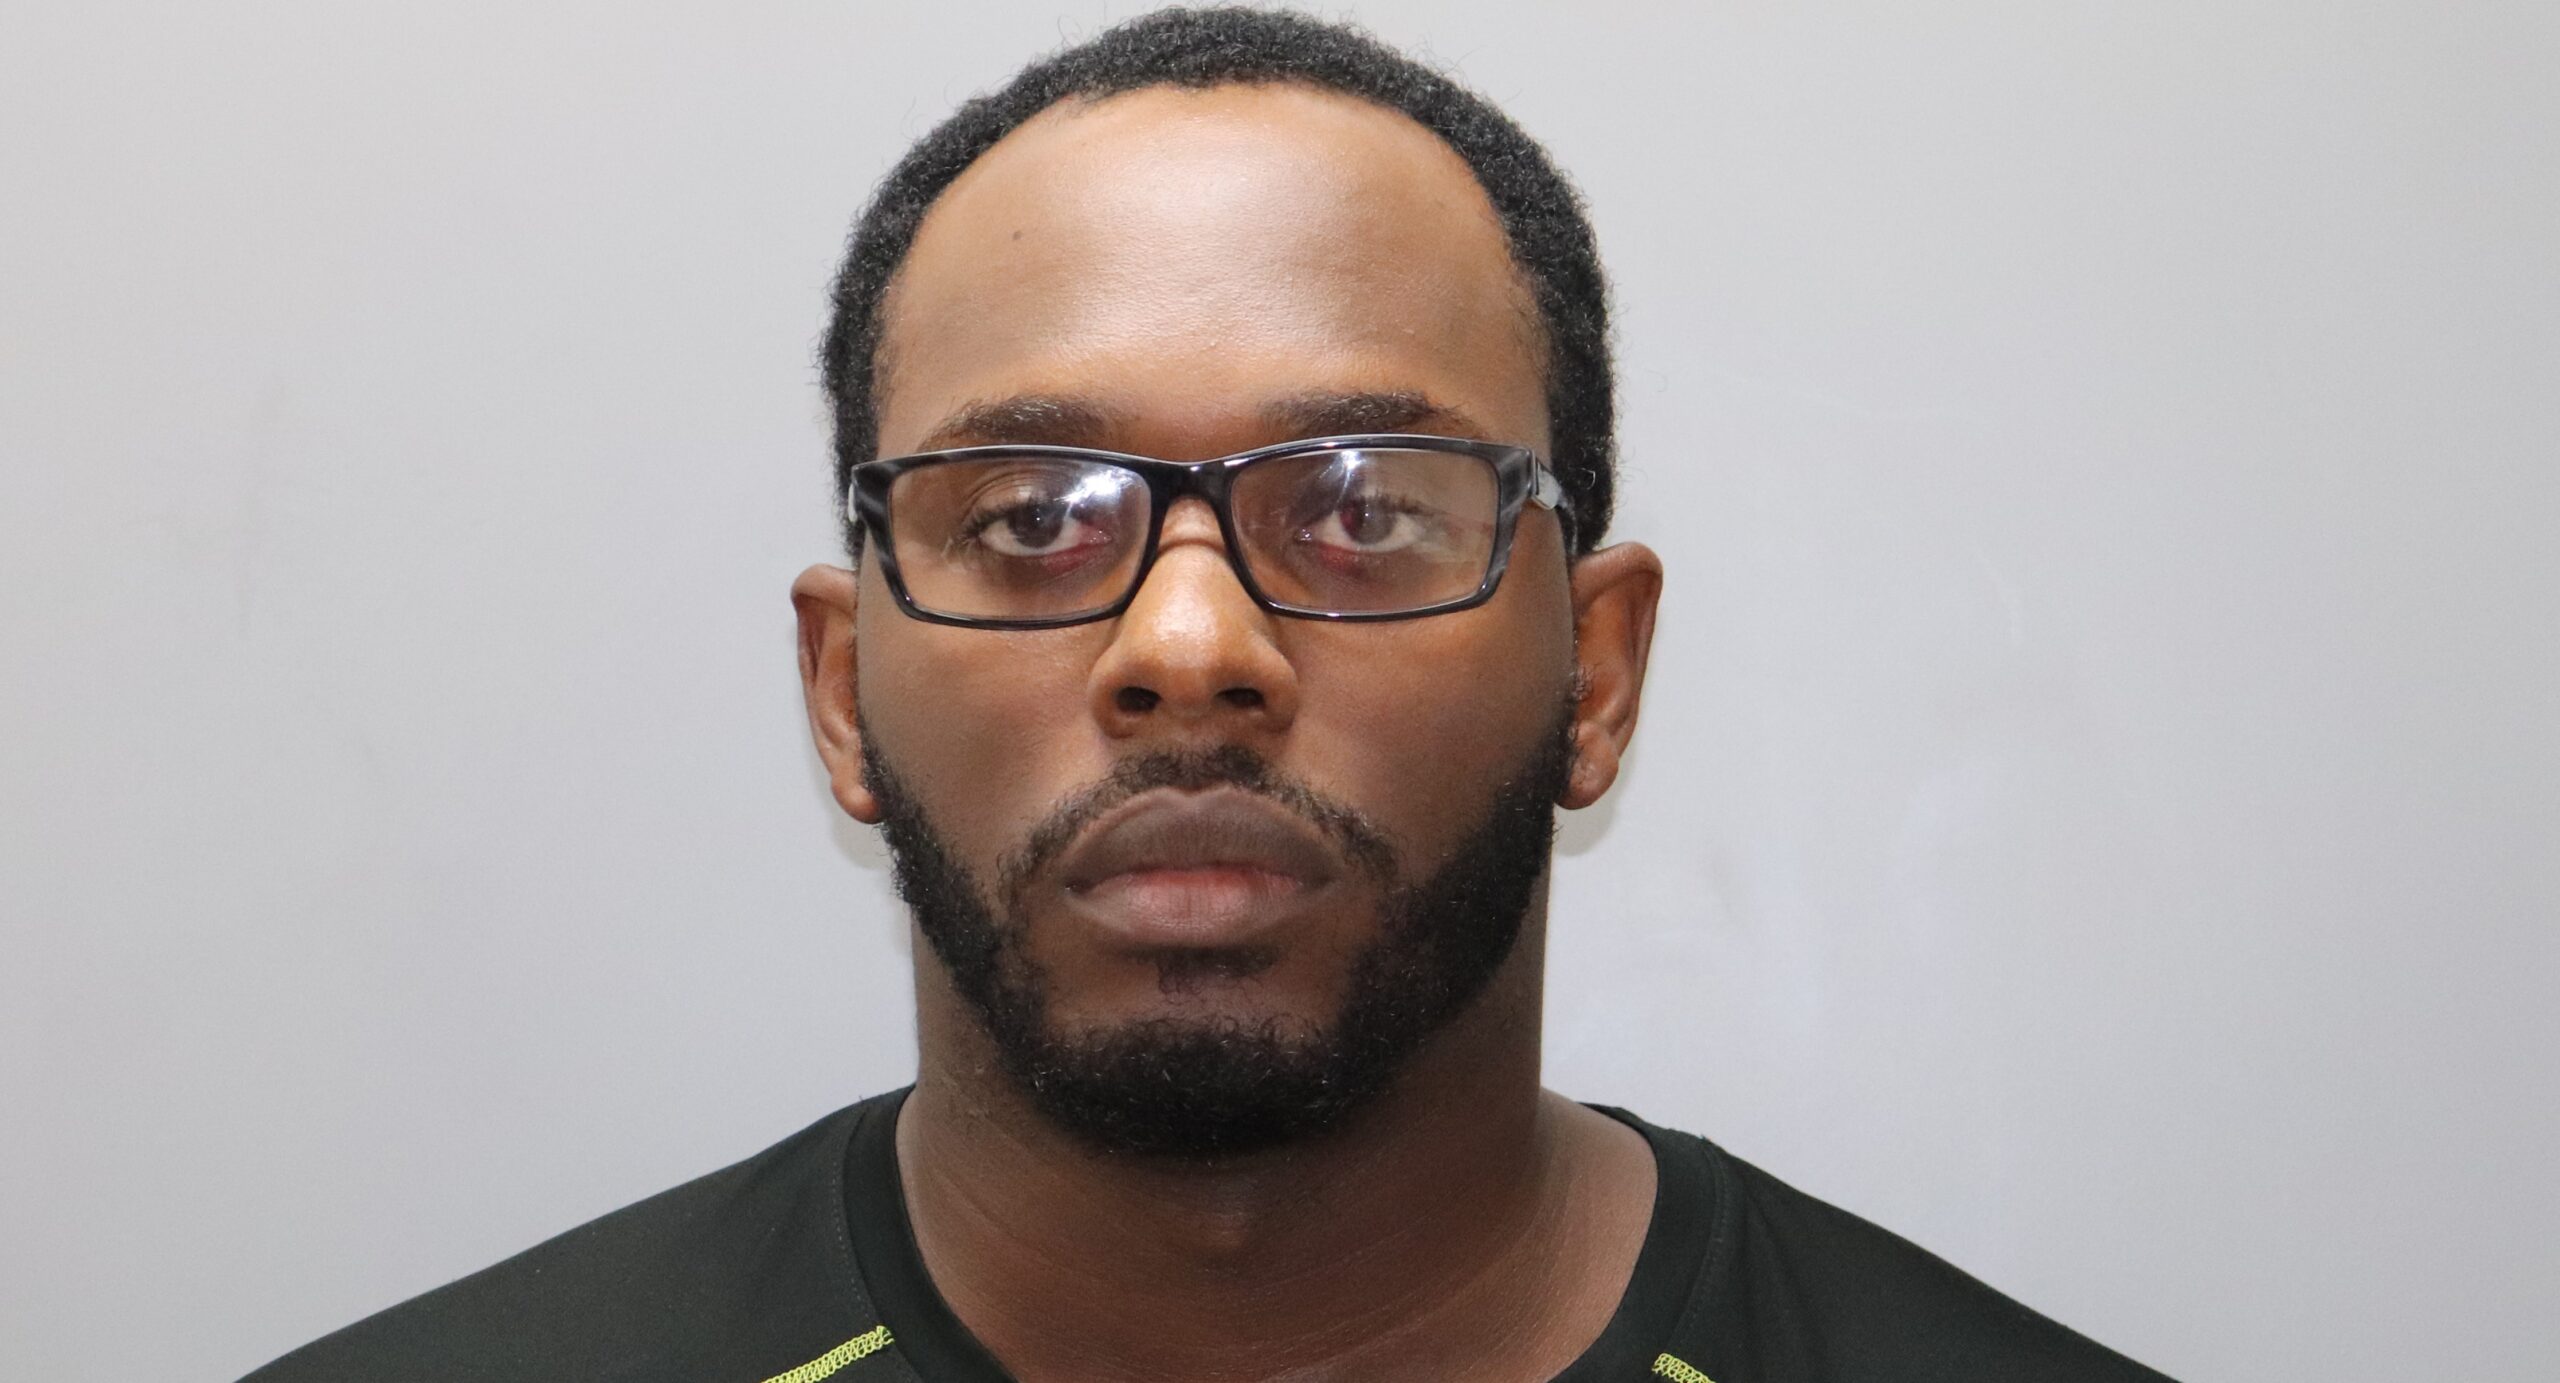 St. Thomas Man Who Repeatedly Raped Underage Girl Arrested By Police: VIPD